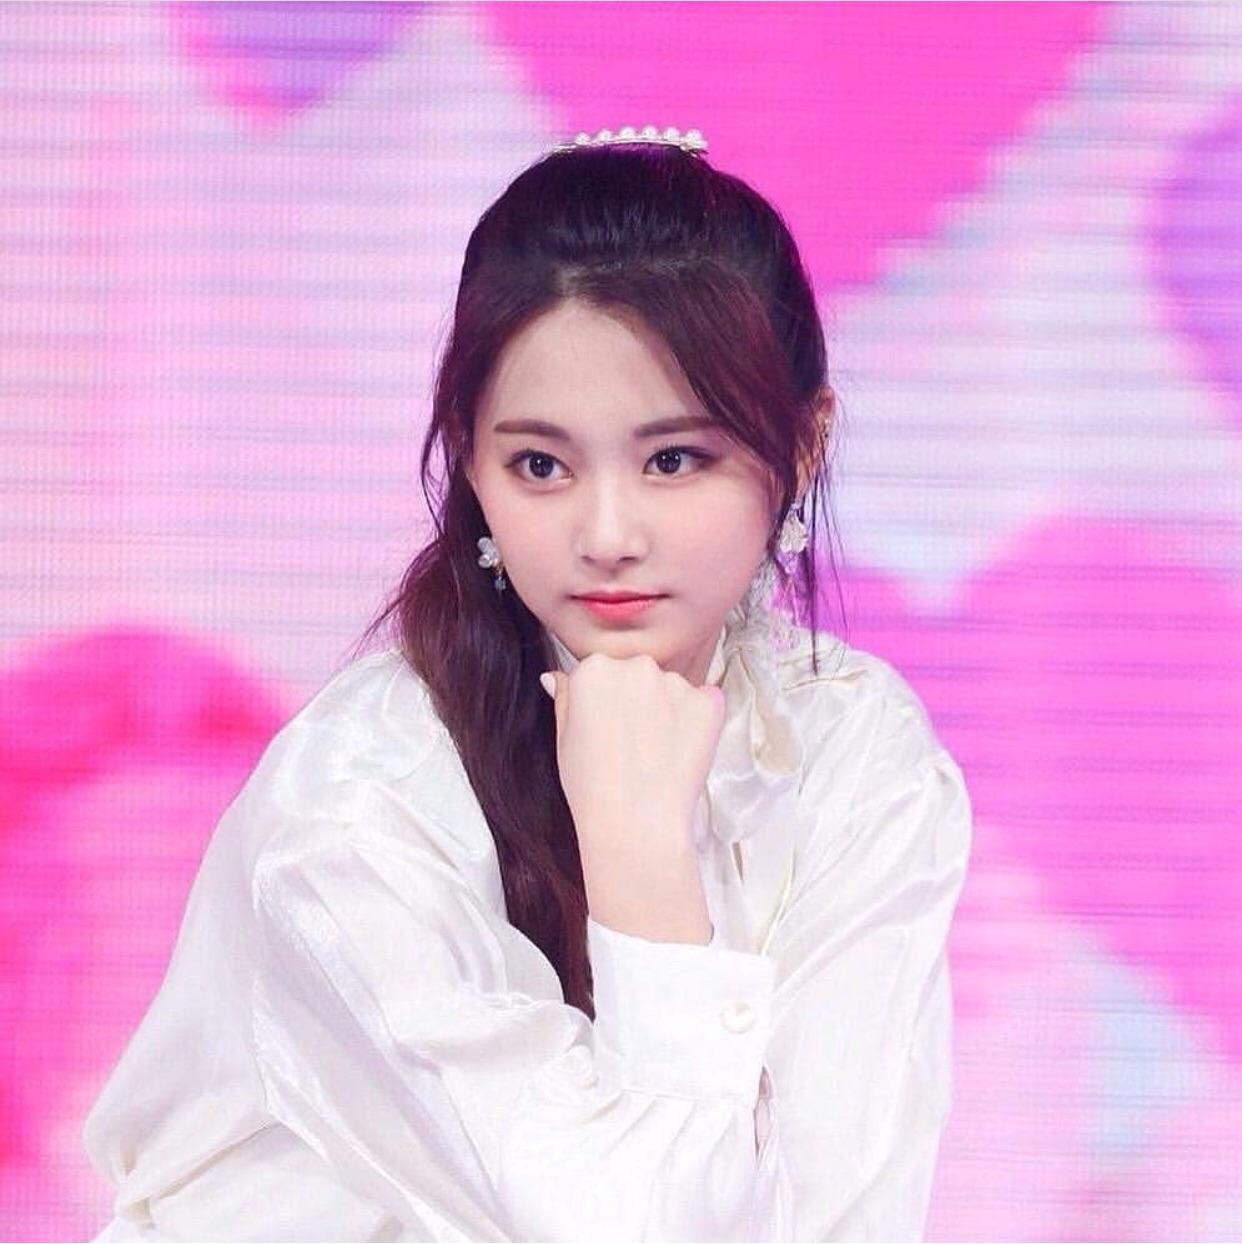 Looking For HD Better Quality Of This Tzuyu Picture For My Wallpaper, Thanks